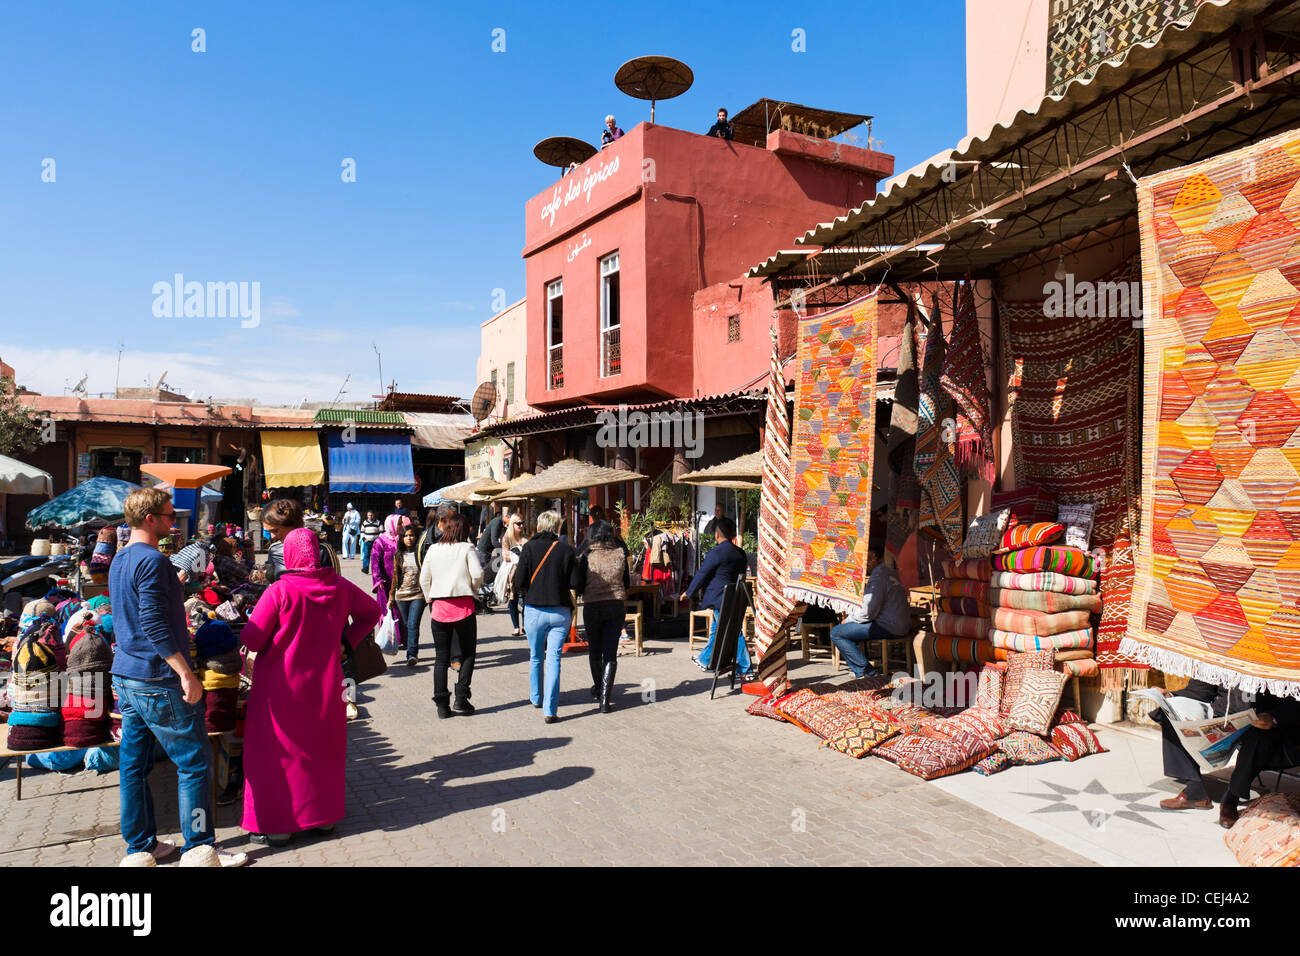 The Cafe des Epices and carpet shop in Rahba Kedima (Place des Epices), Medina, Marrakech, Morocco, North Africa Stock Photo